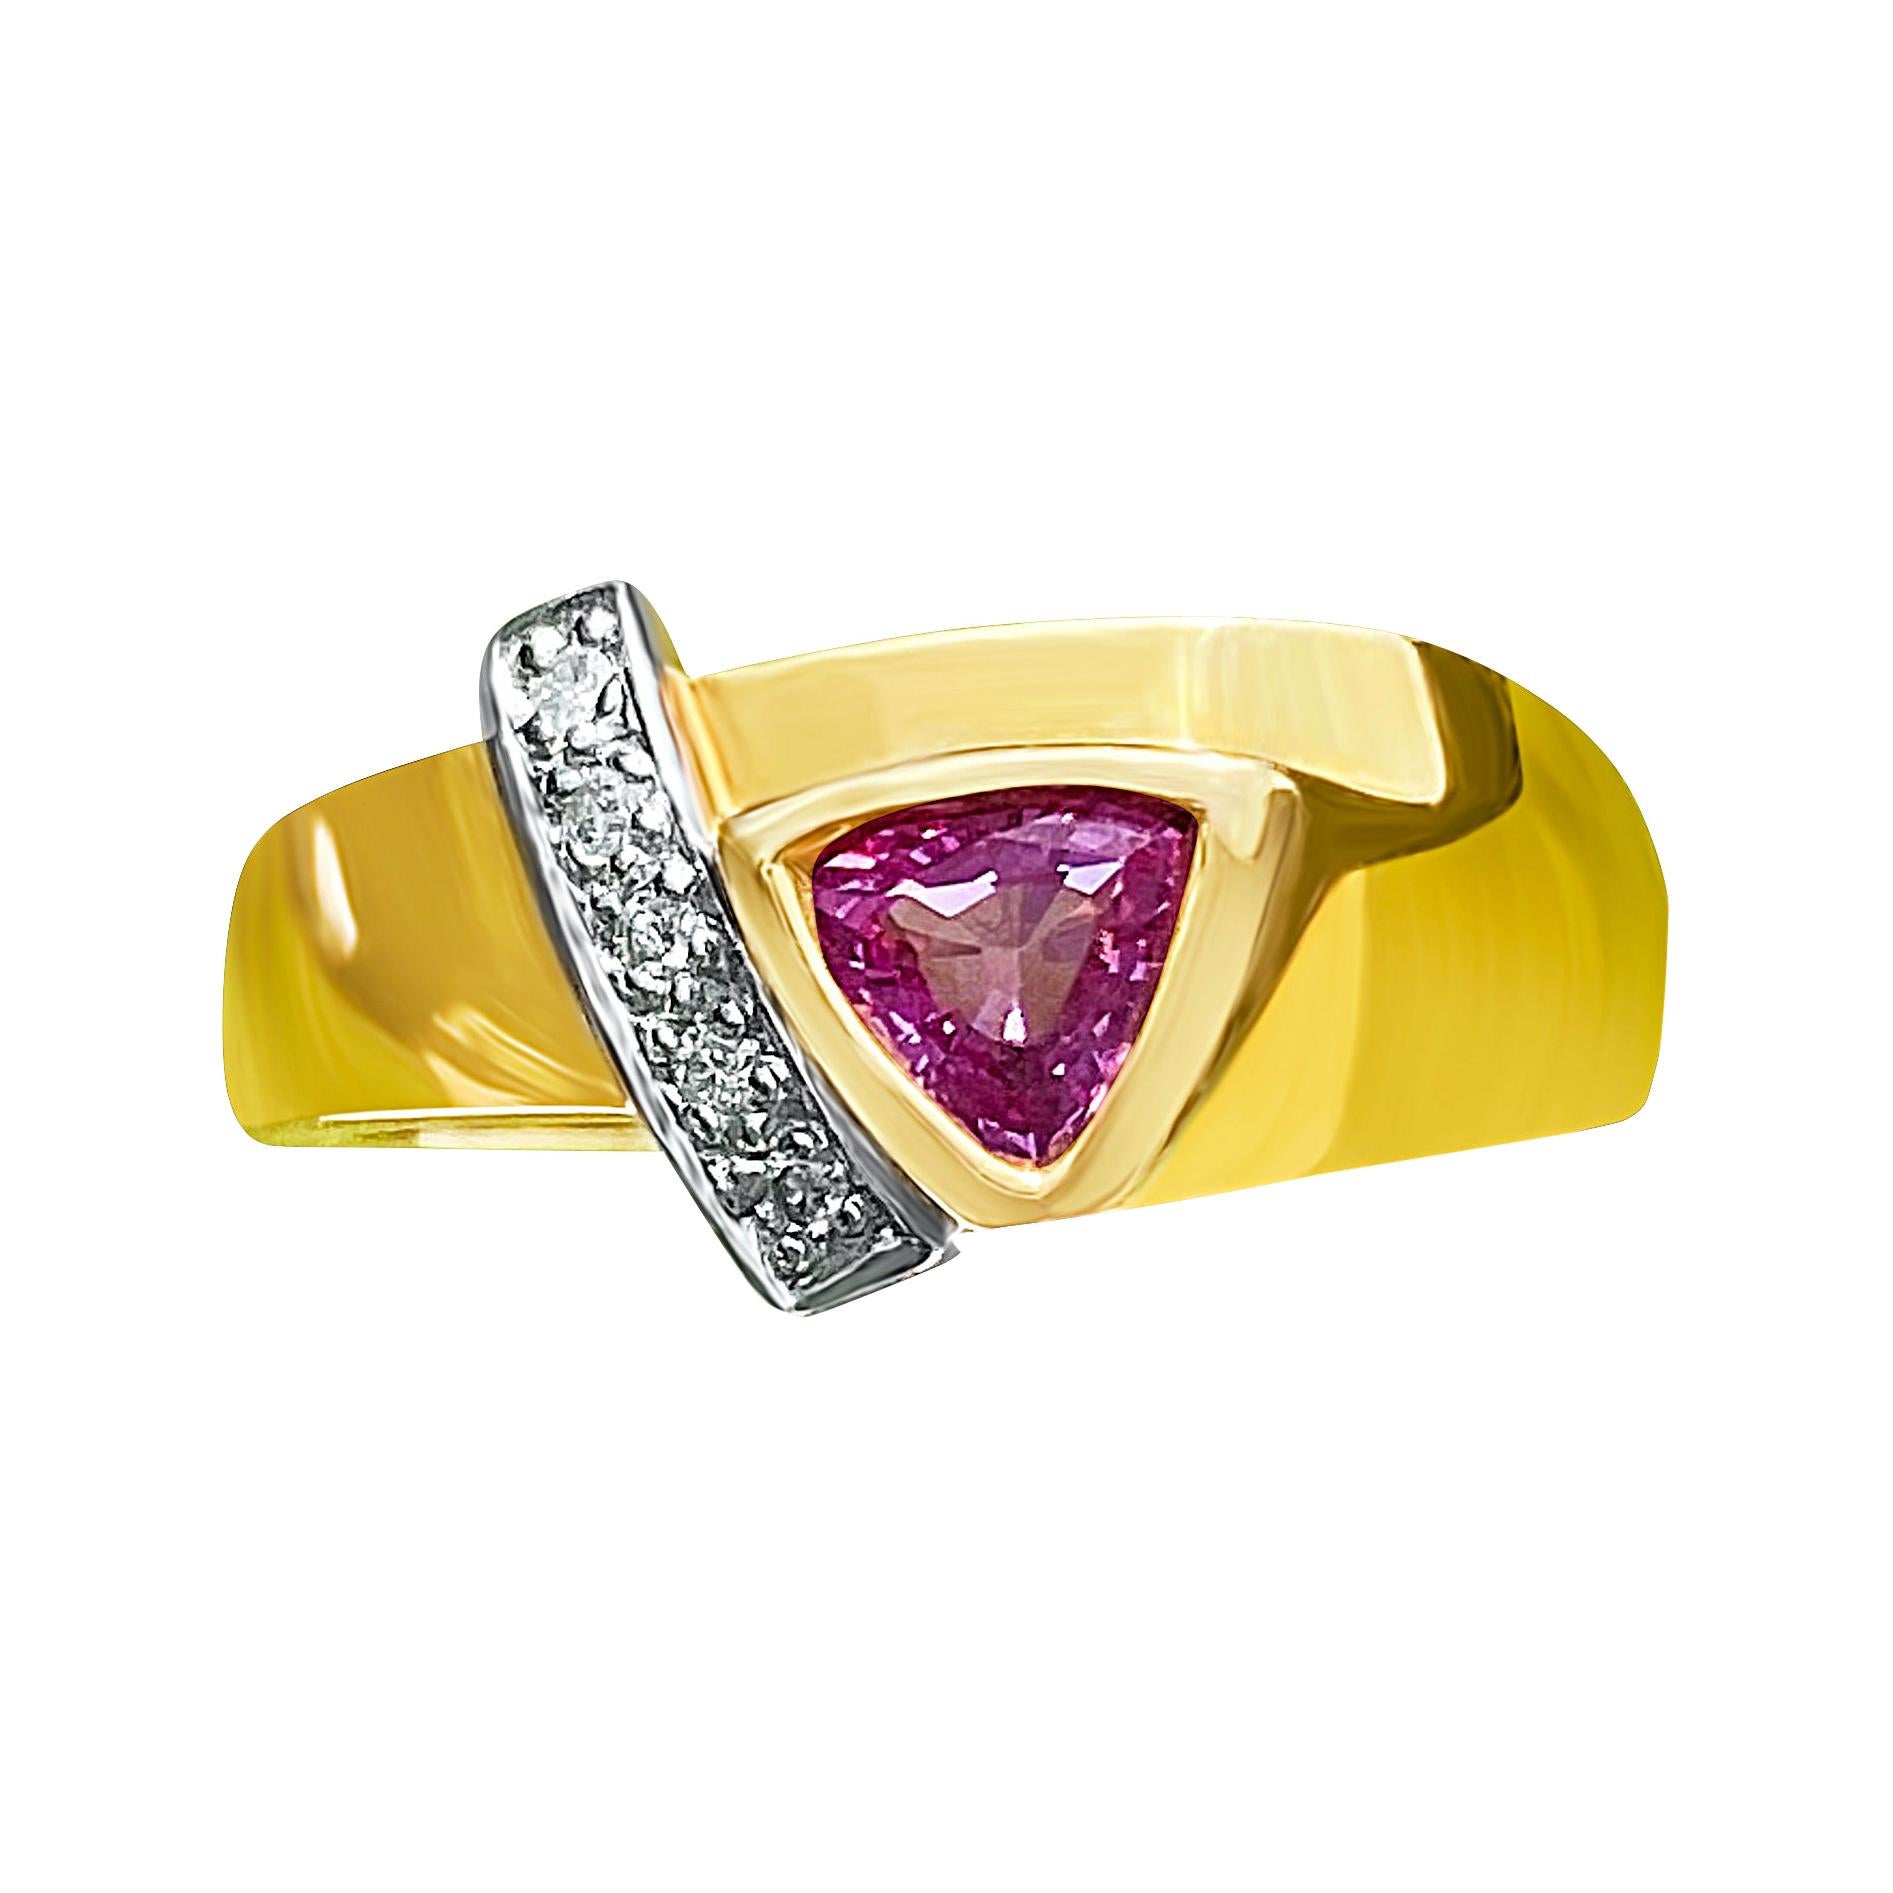 Trilliant Cut Pink Sapphire and Diamond Ring in 14k Yellow Gold